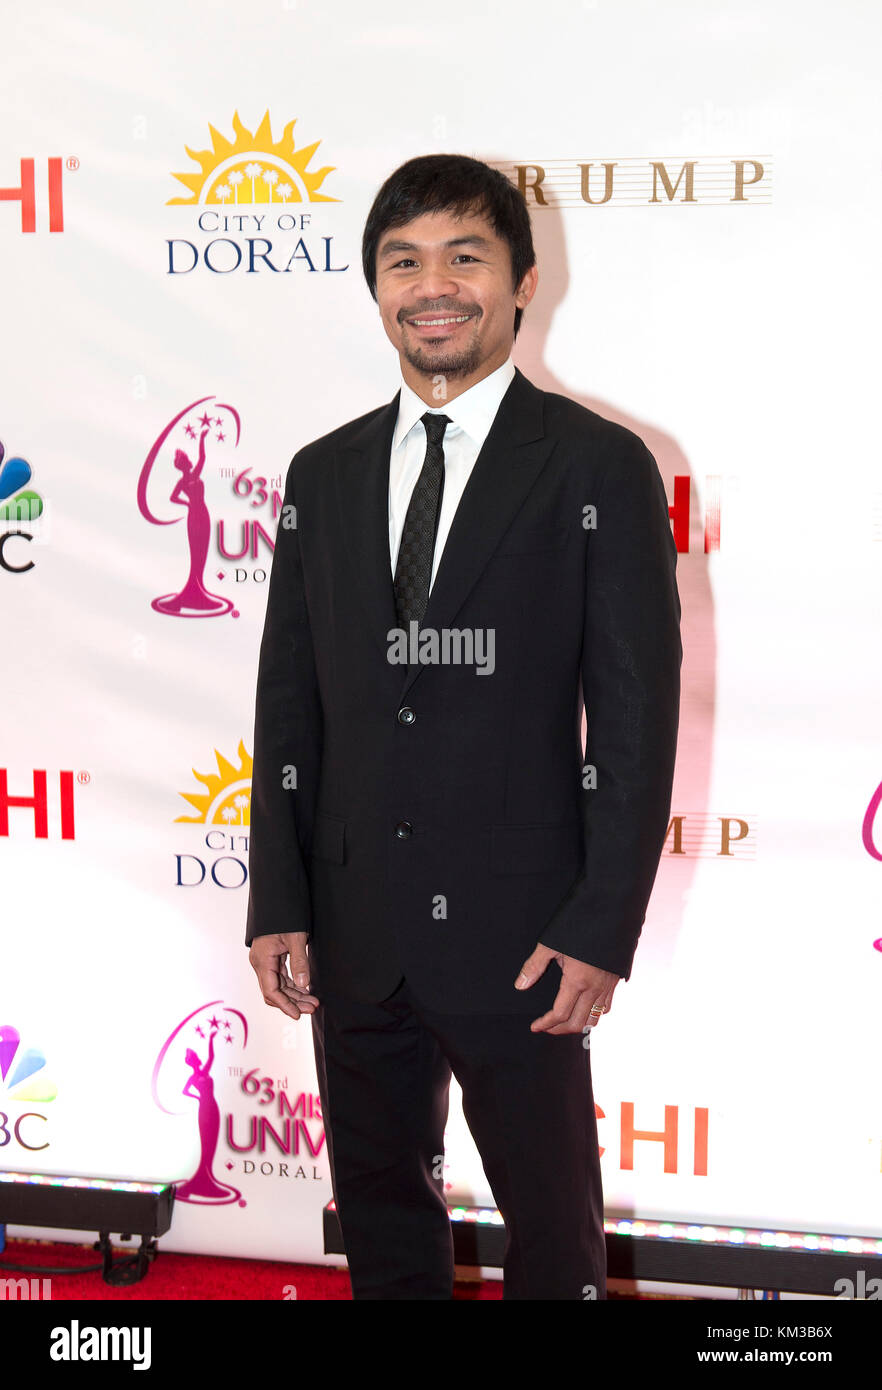 DORAL, FL - JANUARY 25:  Manny Pacquiao attends The 63rd Annual Miss Universe Pageant at Trump National Doral on January 25, 2015 in Doral, Florida.  People:  Manny Pacquiao Stock Photo